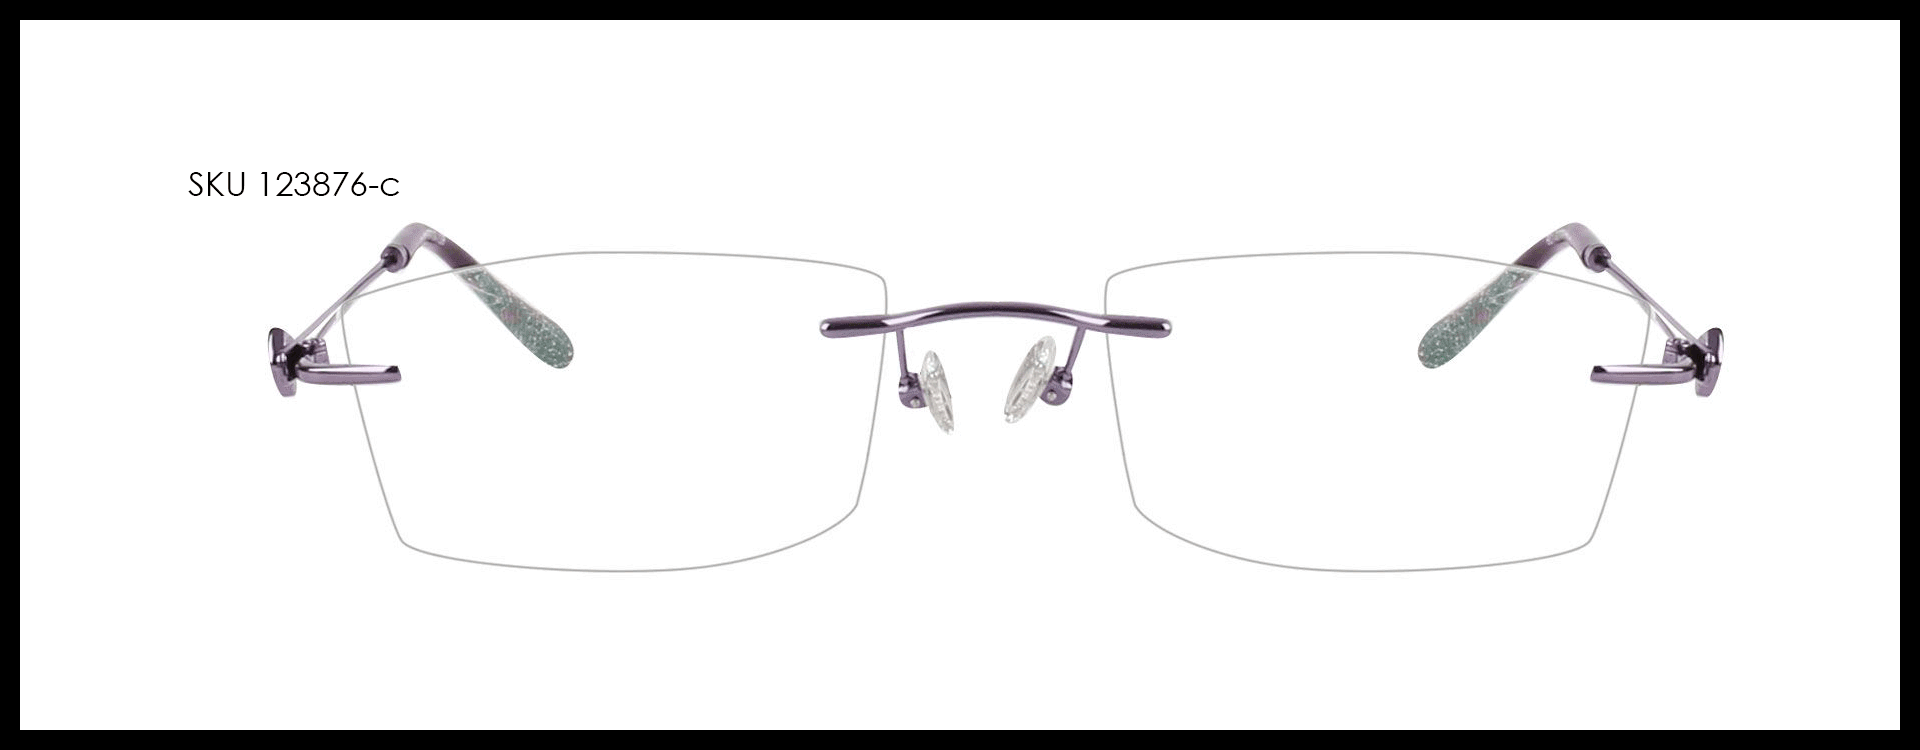 Why Rimless Glasses Are A Game-Changer For Glass Wearers?